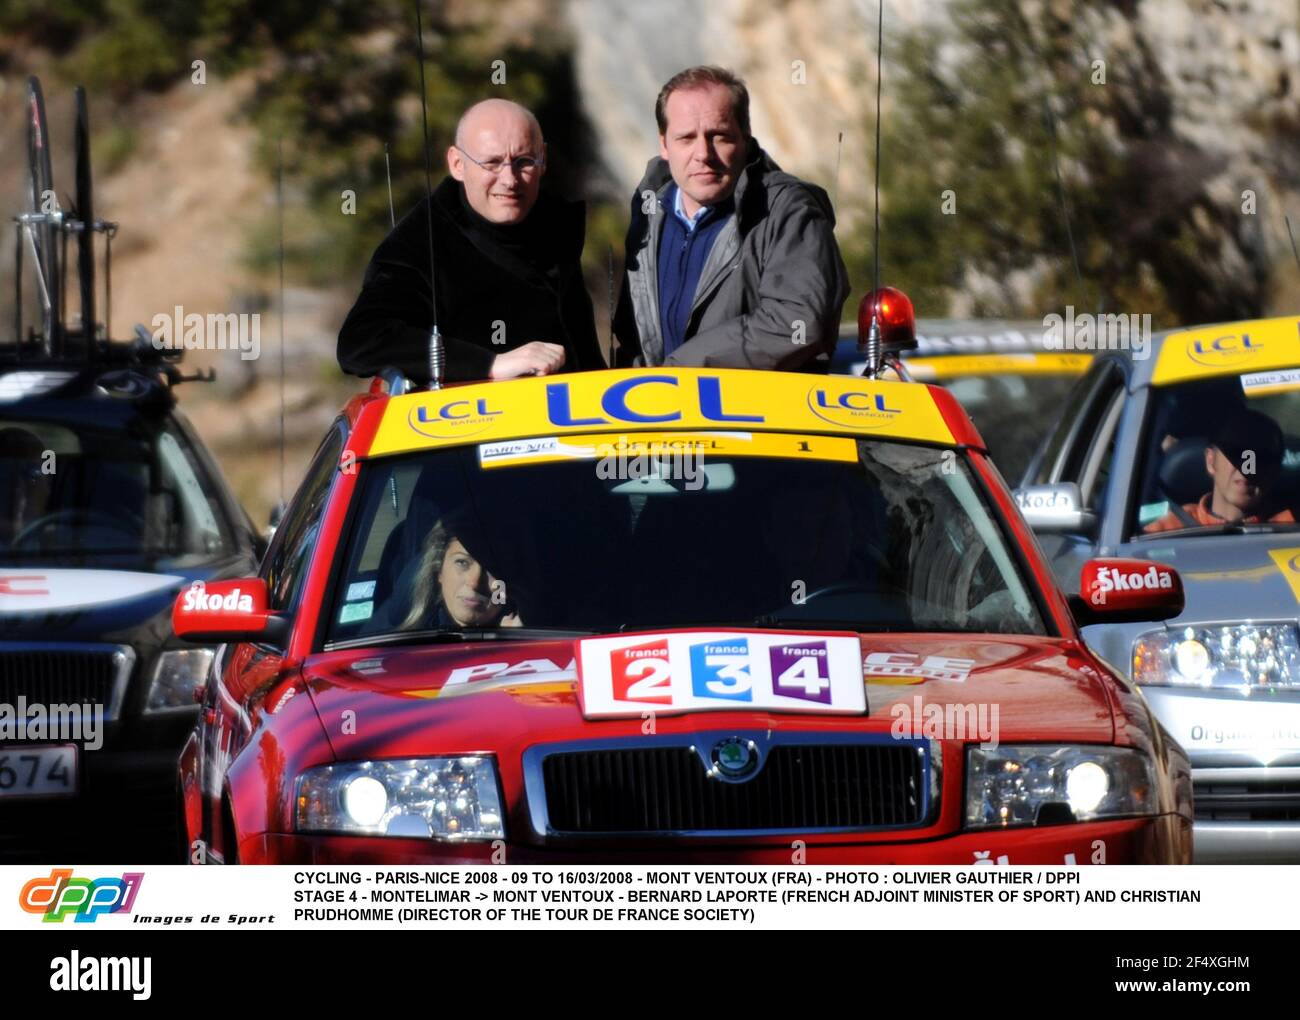 CYCLING - PARIS-NICE 2008 - 09 TO 16/03/2008 - MONT VENTOUX (FRA) - PHOTO : OLIVIER GAUTHIER / DPPI STAGE 4 - MONTELIMAR -> MONT VENTOUX - BERNARD LAPORTE (FRENCH ADJOINT MINISTER OF SPORT) AND CHRISTIAN PRUDHOMME (DIRECTOR OF THE TOUR DE FRANCE SOCIETY) Stock Photo